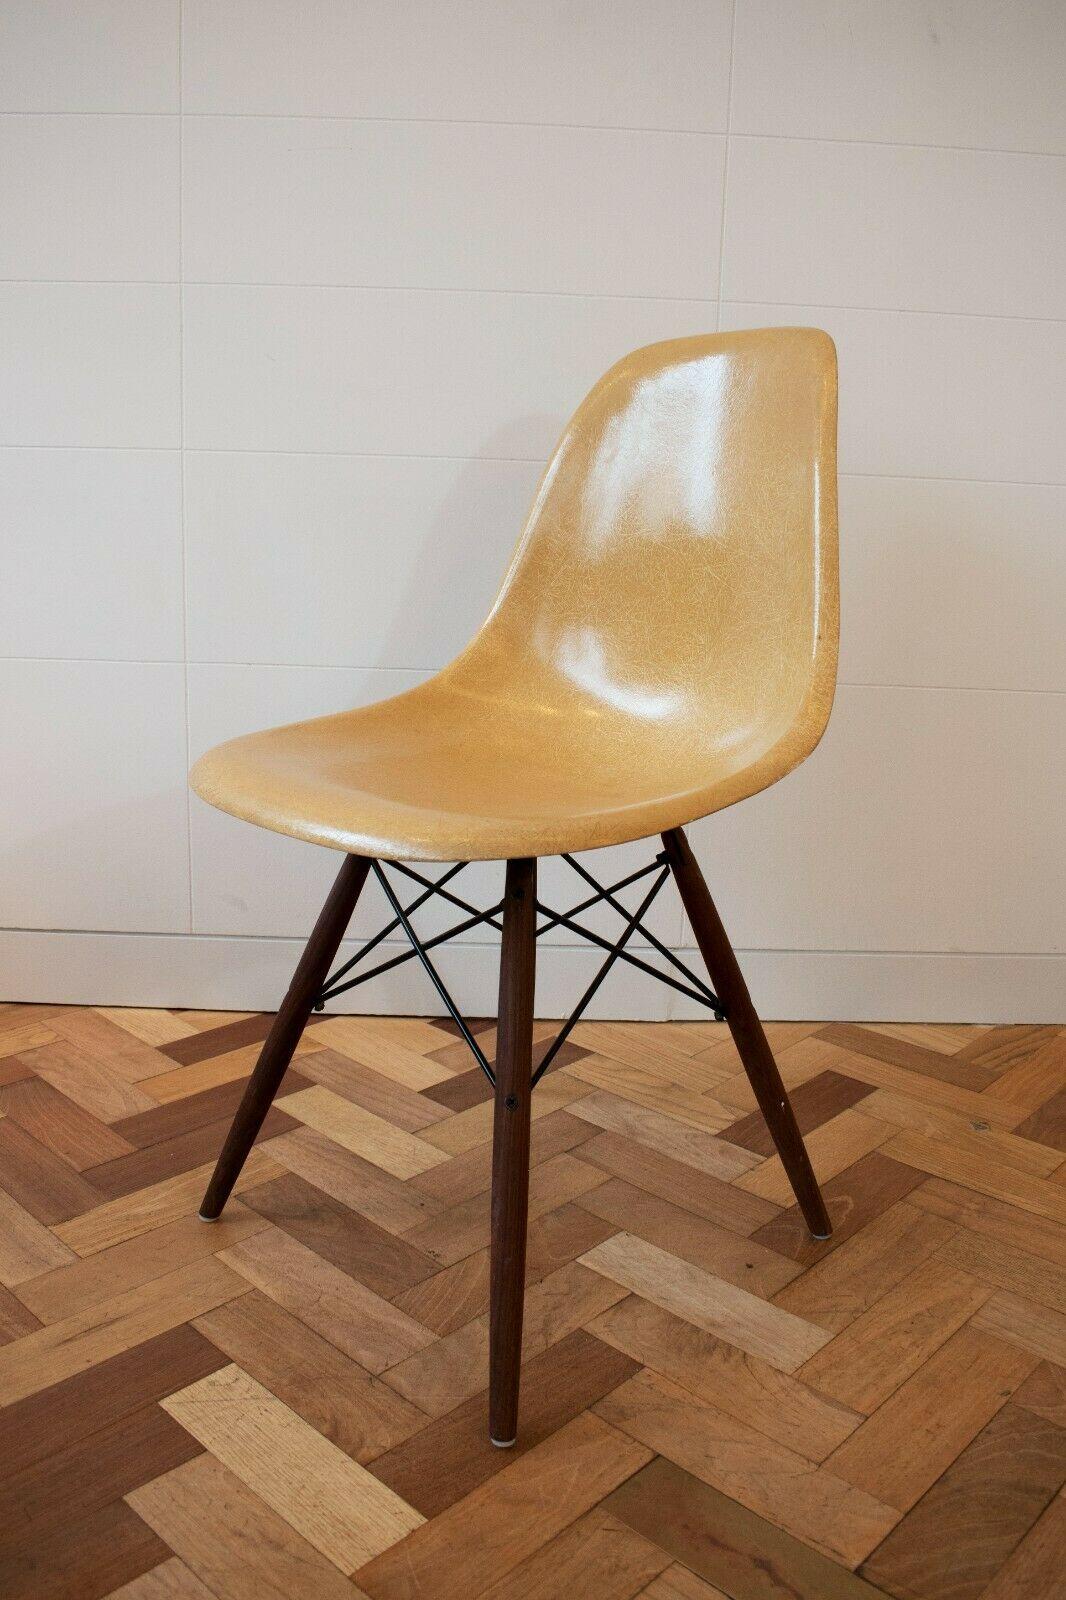 Set of 8 1960s Fibreglass Chairs by Charles and Ray Eames for Herman Miller 3